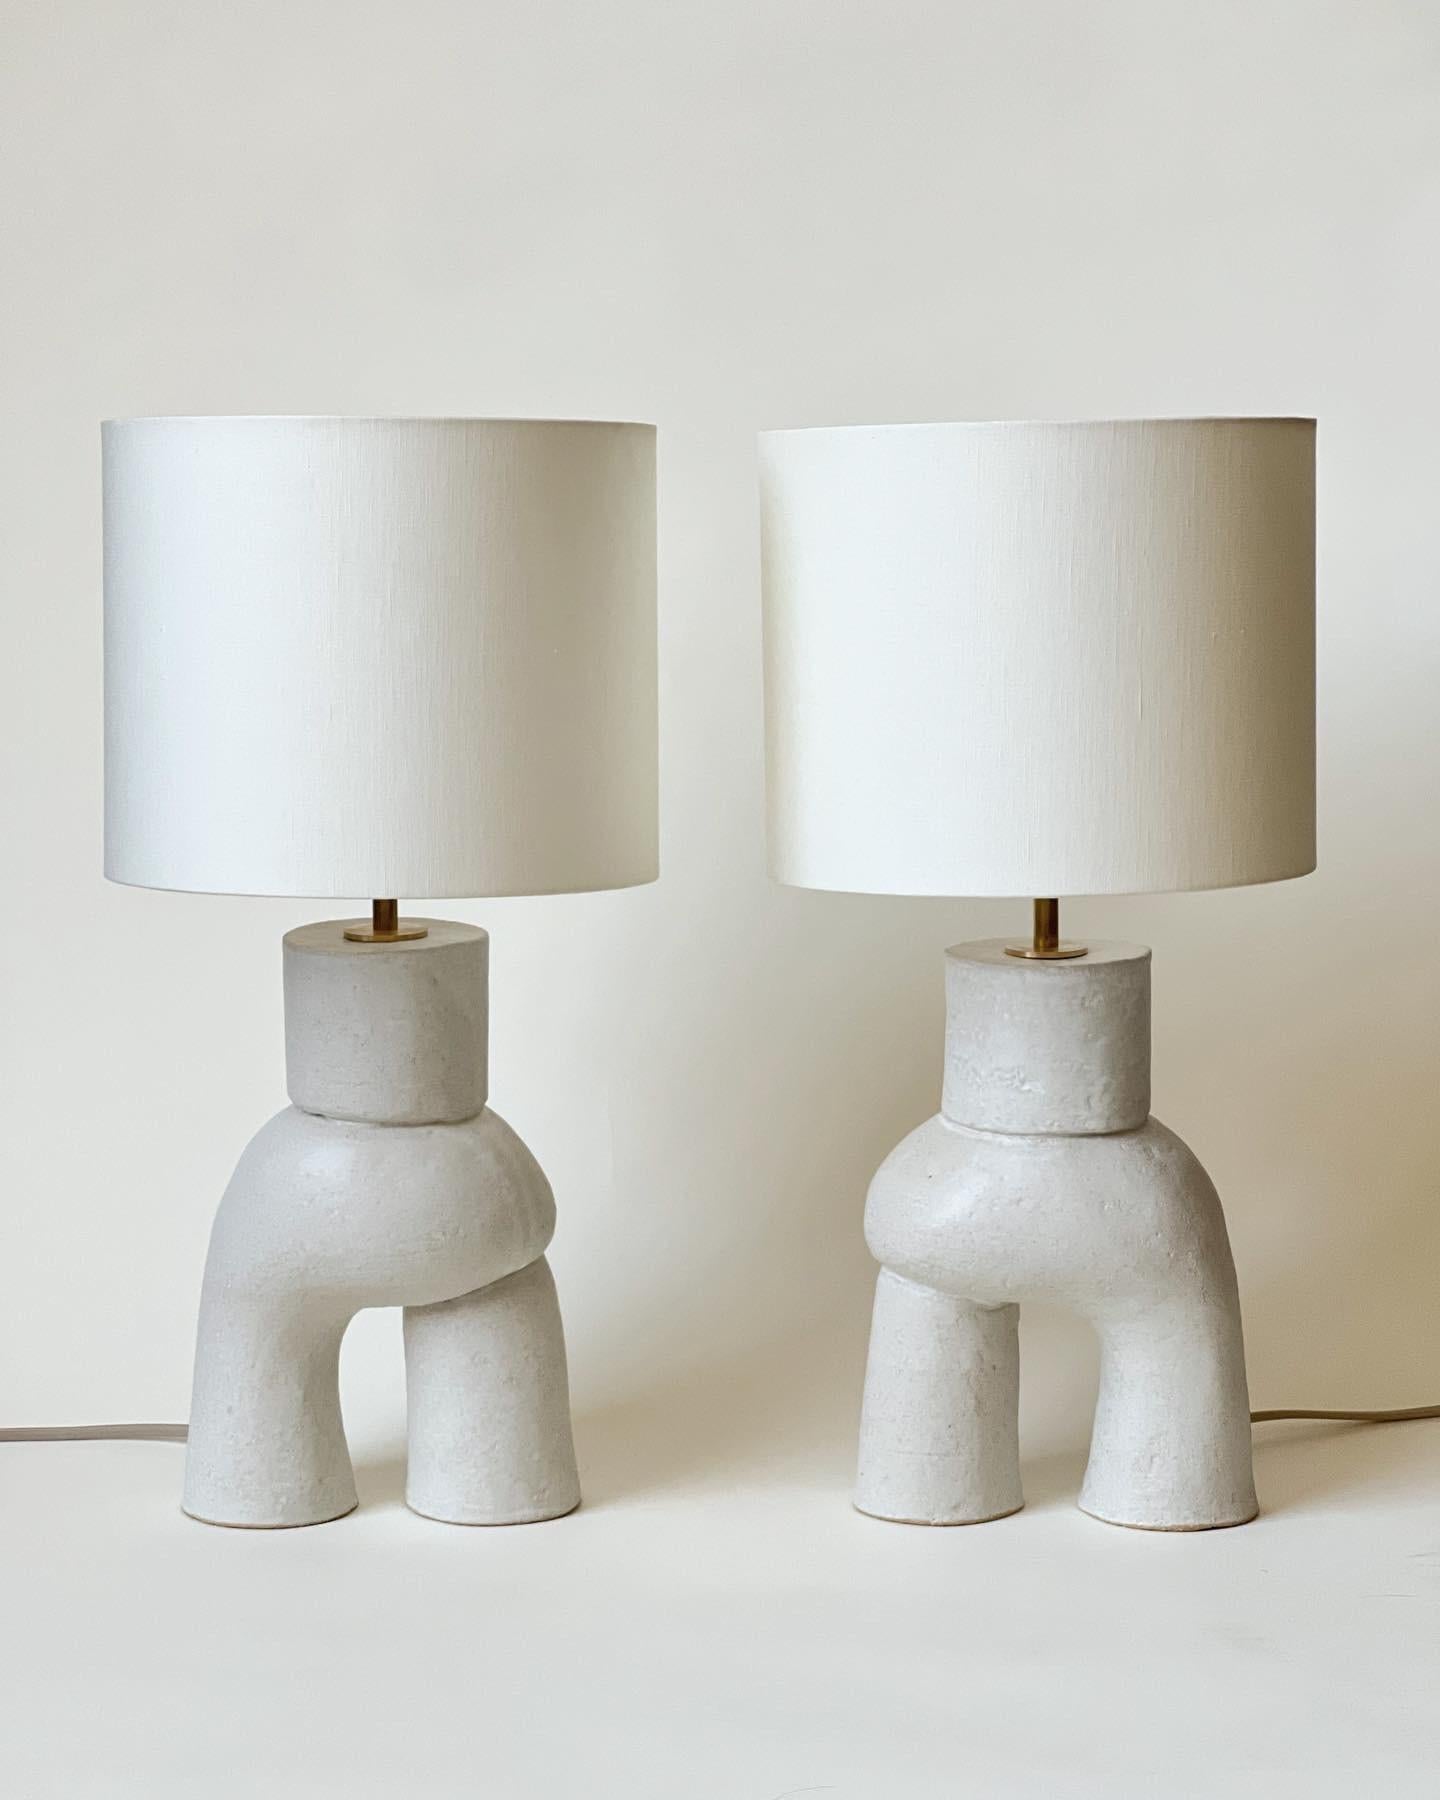 Lamp: H 12'“ x W 10”.

Shade: Oyster Linen drum, H 11” x W 13”.

Clay body: Sculpture buff.

Hardware: Unfinished brass.

*Shade color may be custom.


RW lamp is hand sculpted and made to order. Please allow for slight variations between